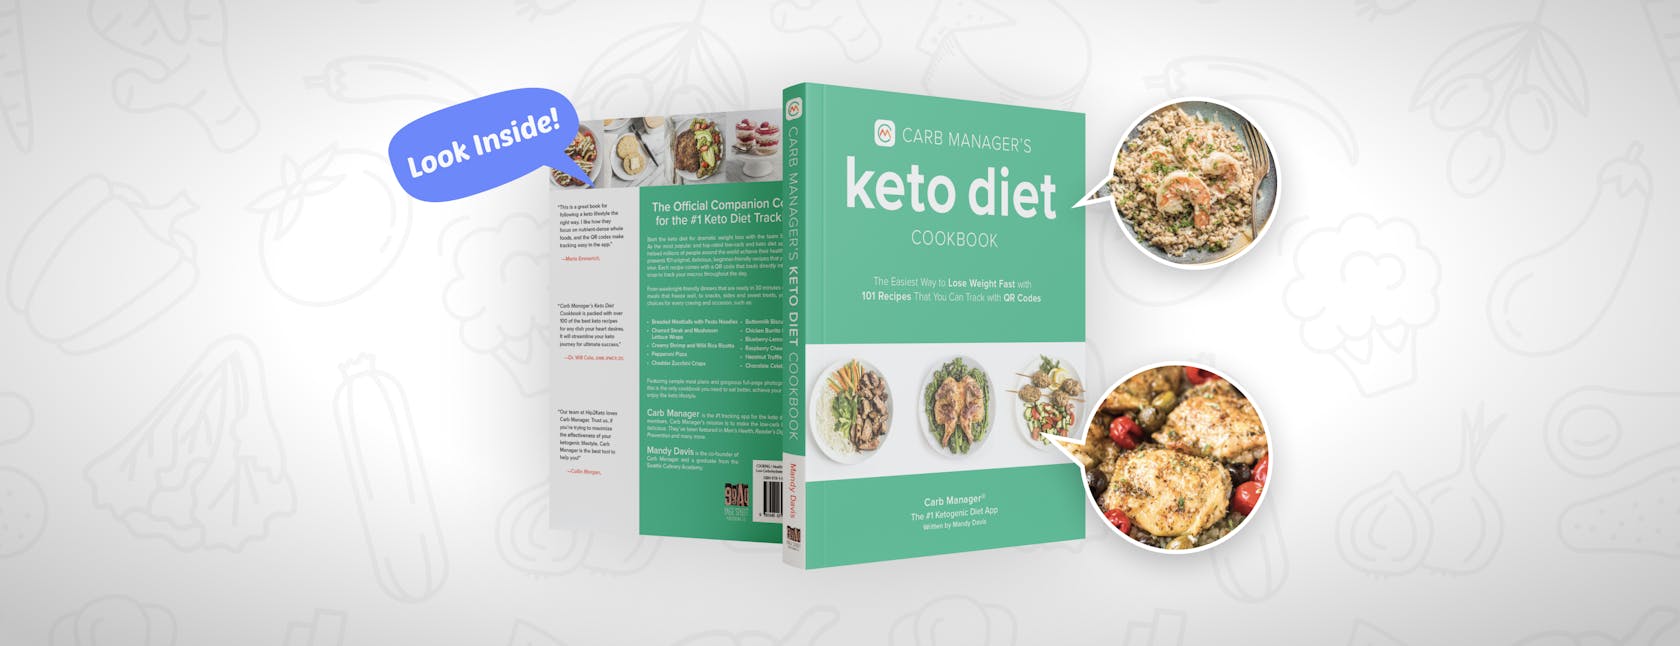 Carb Manager's Keto Cookbook | Carb Manager